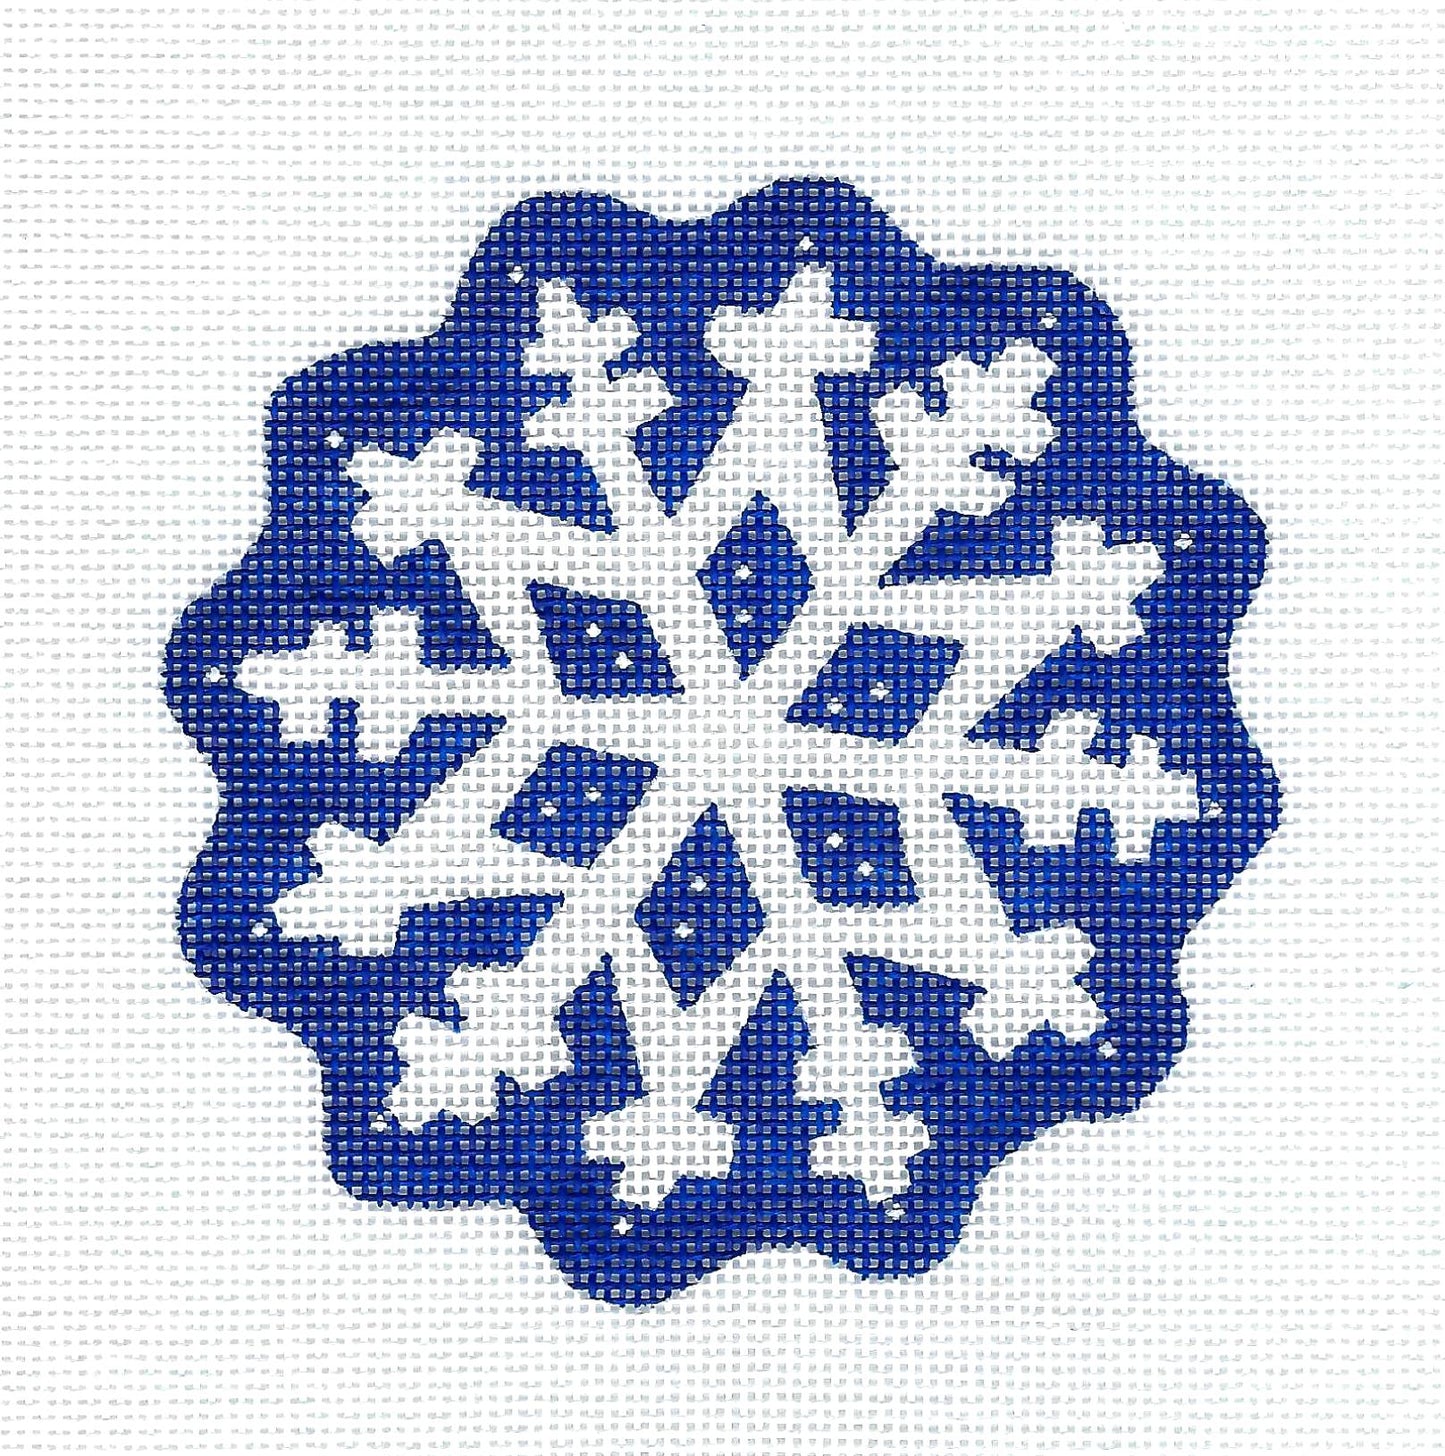 Scalloped Snowflake on Blue handpainted 18 mesh Needlepoint Ornament Canvas by Pepperberry